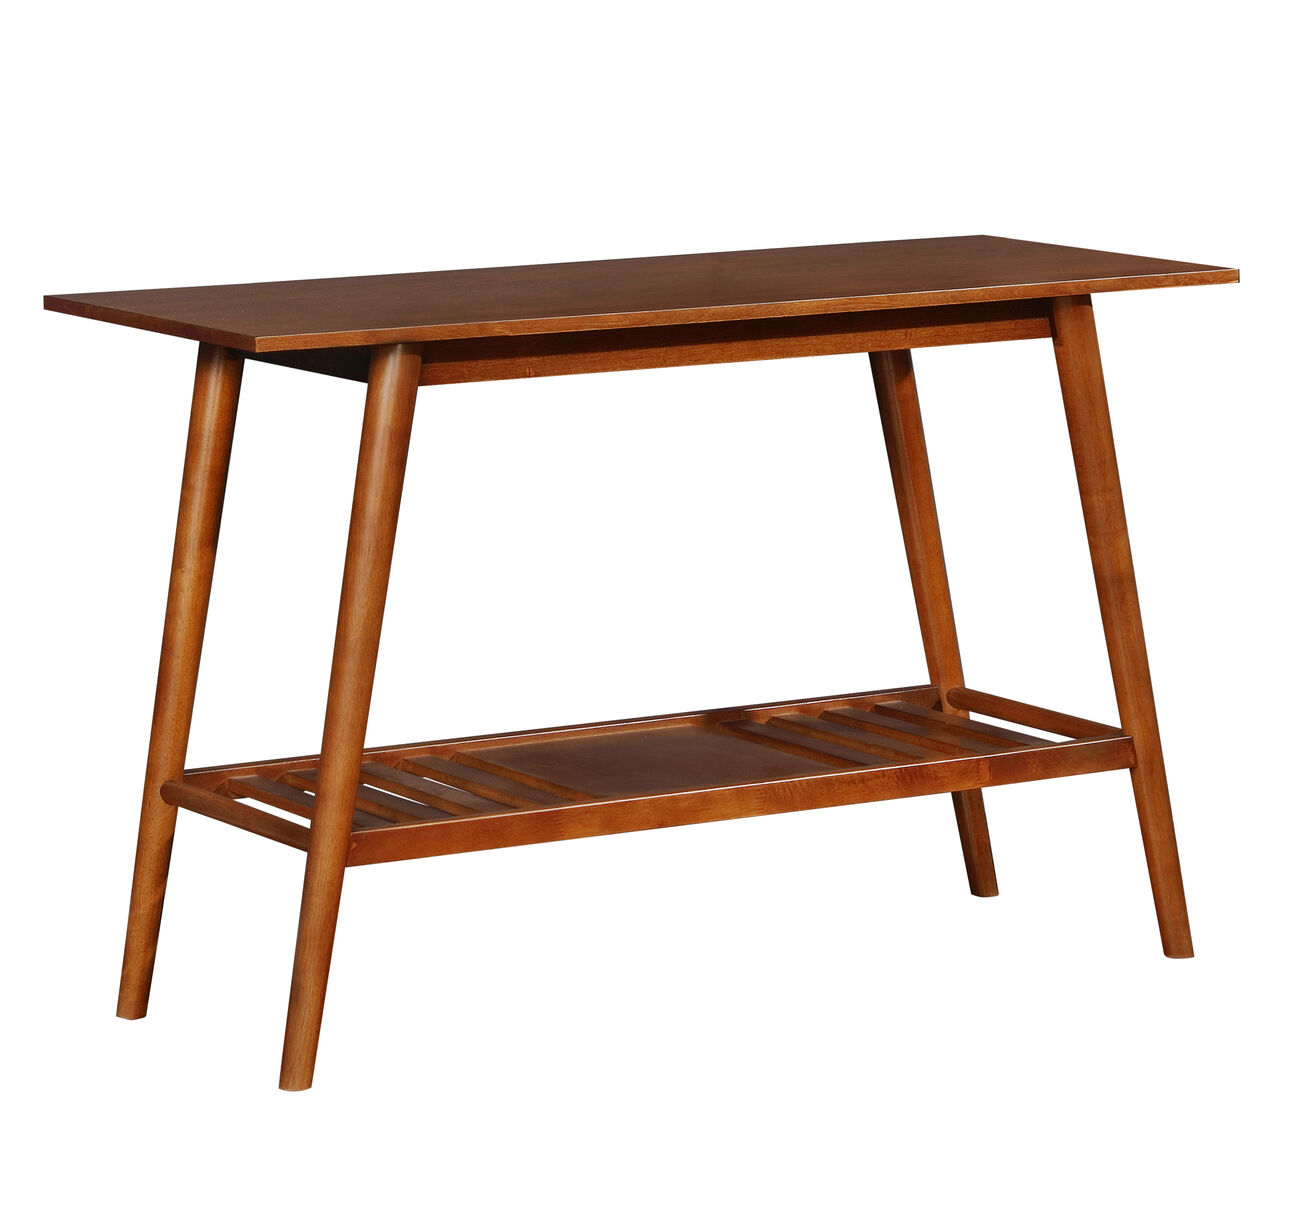 Wooden Console Table with Angled Legs and Open Shelf Storage, Brown